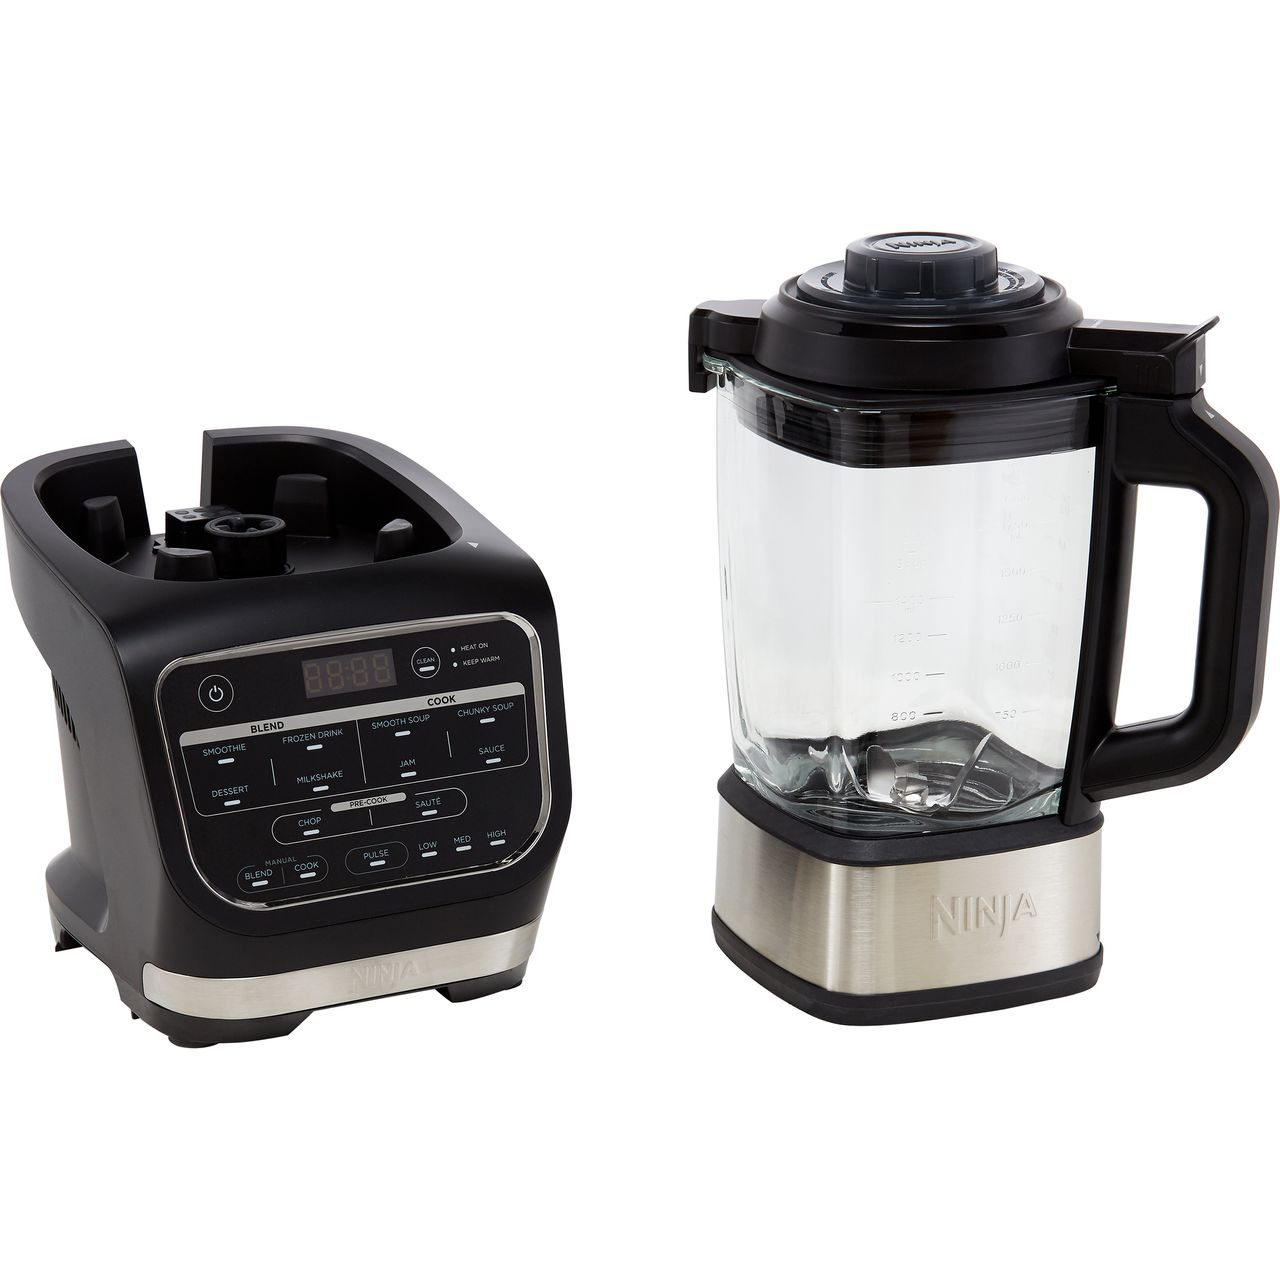 Ninja Foodi Blender & Soup Maker HB150UK 🍲 A soup maker and blender for  all seasons! Show off both hot and cold creations with this versatile  2-in-1, By Gowan Home